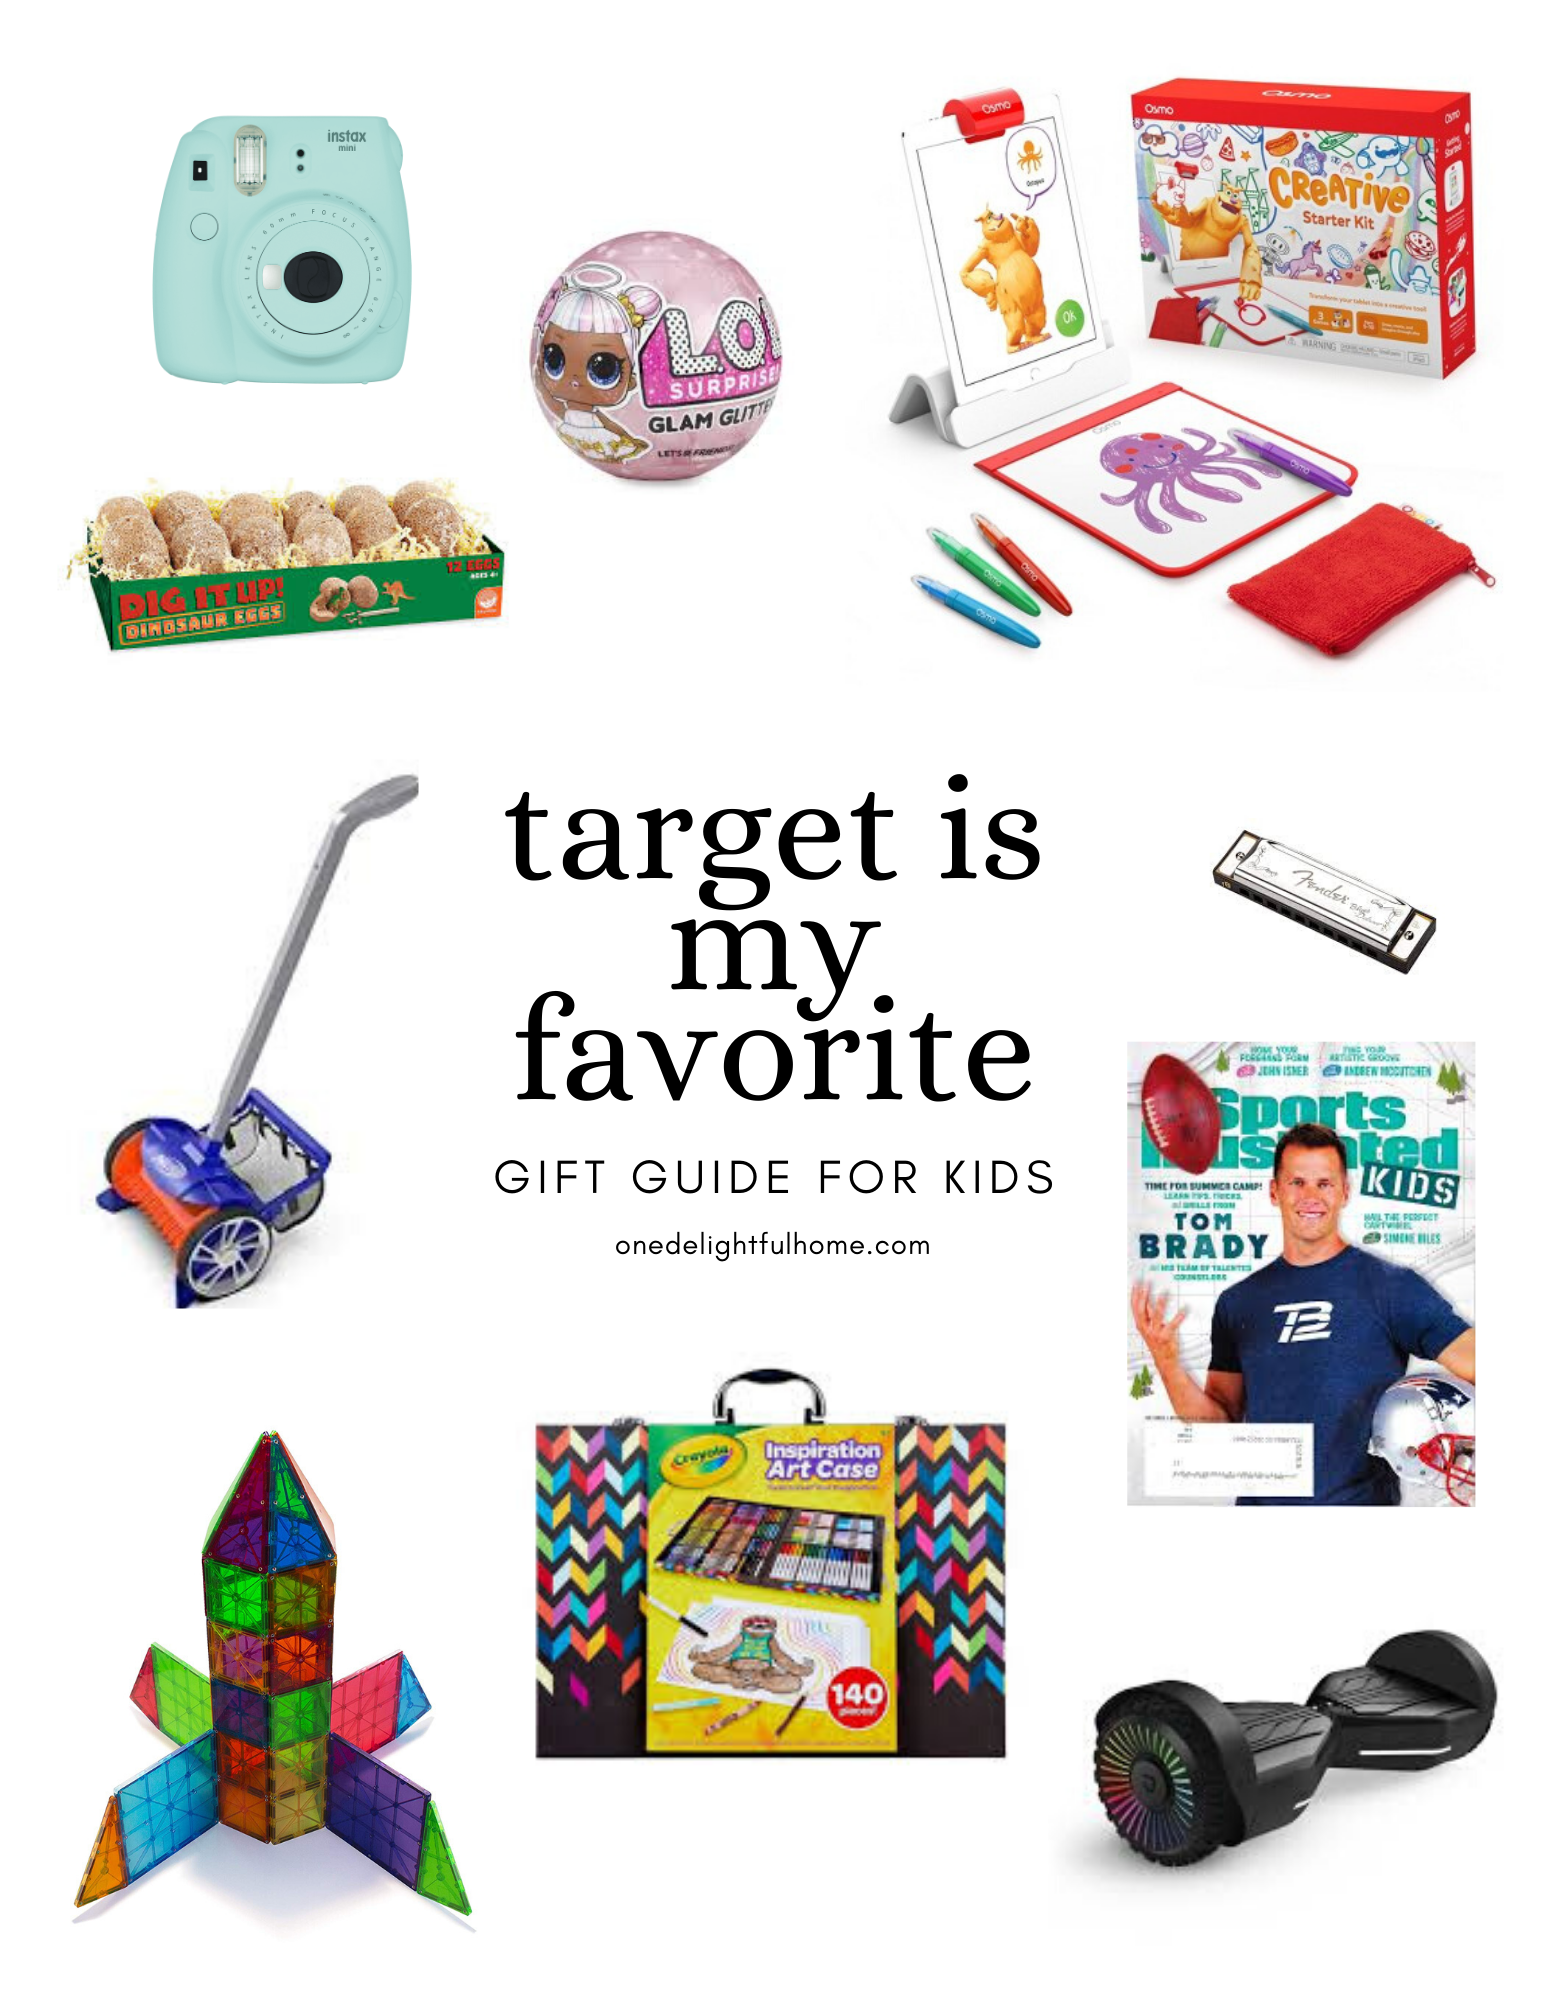 gift guide for kids  target is my favorite + one delightful home